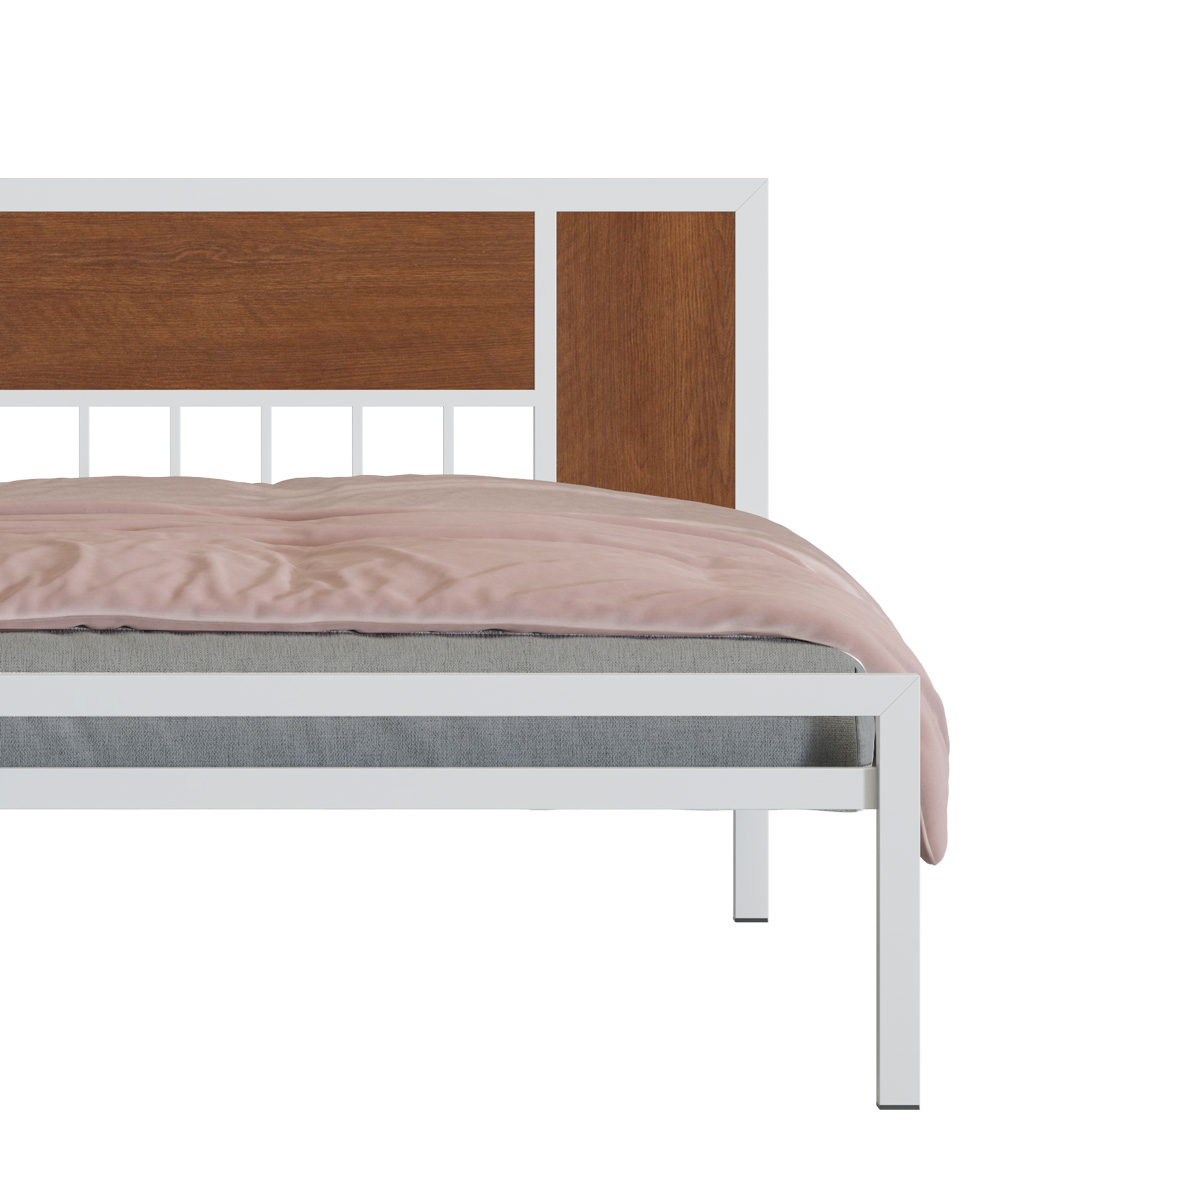 BED- SARA DOUBLE BED-BDH-243-2-1-99 (WHITE)